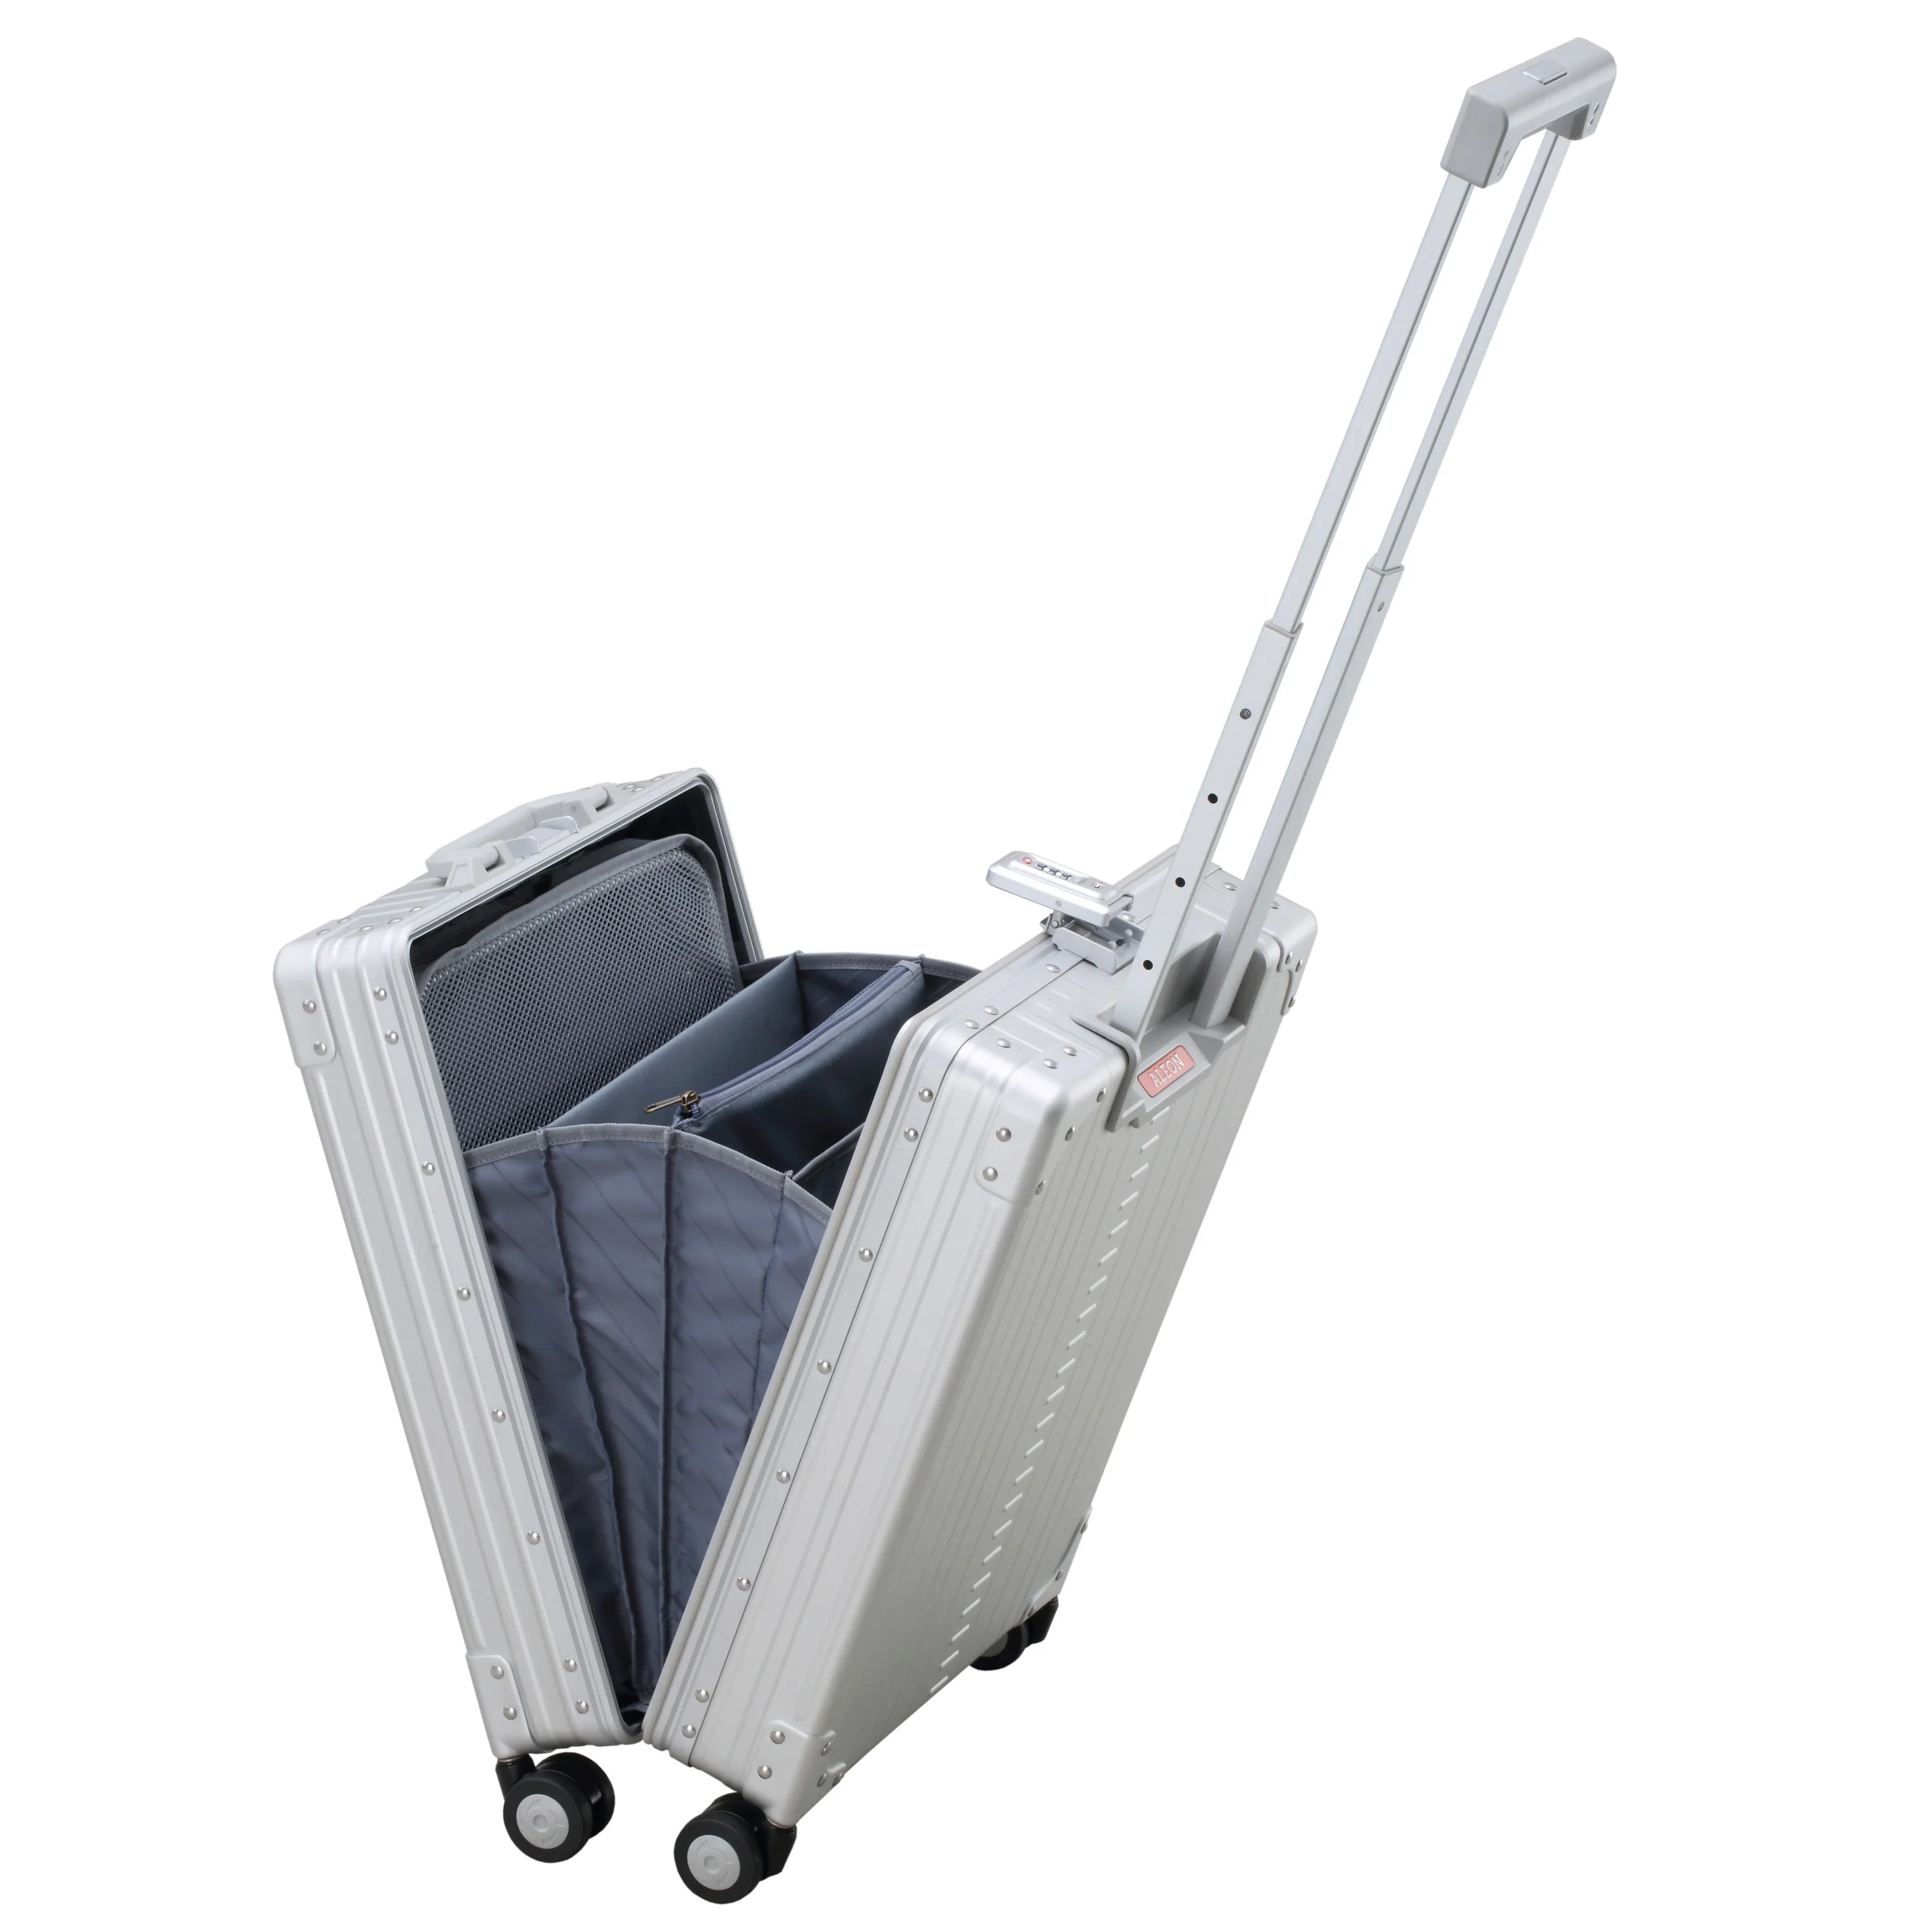 Aleon Vertical Business Carry-On Kabinentrolley 56 cm - Sapphire